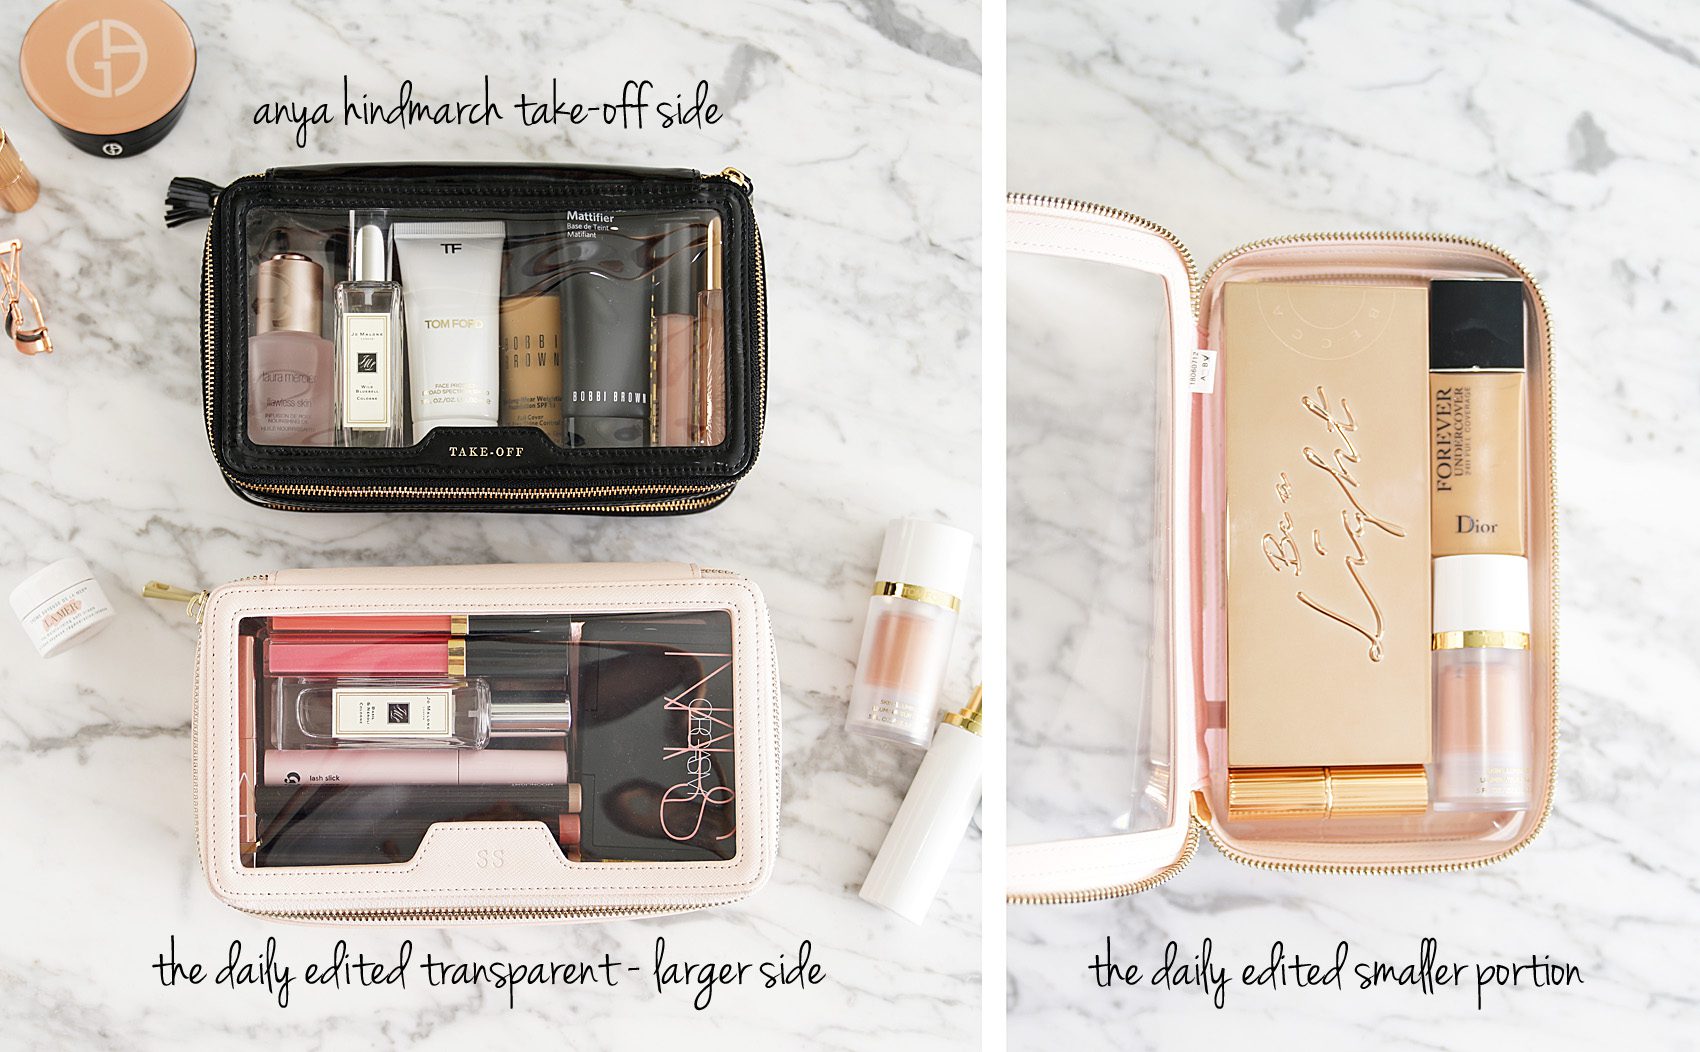 The Daily Edited Transparent Cosmetic Case vs. Anya Hindmarch